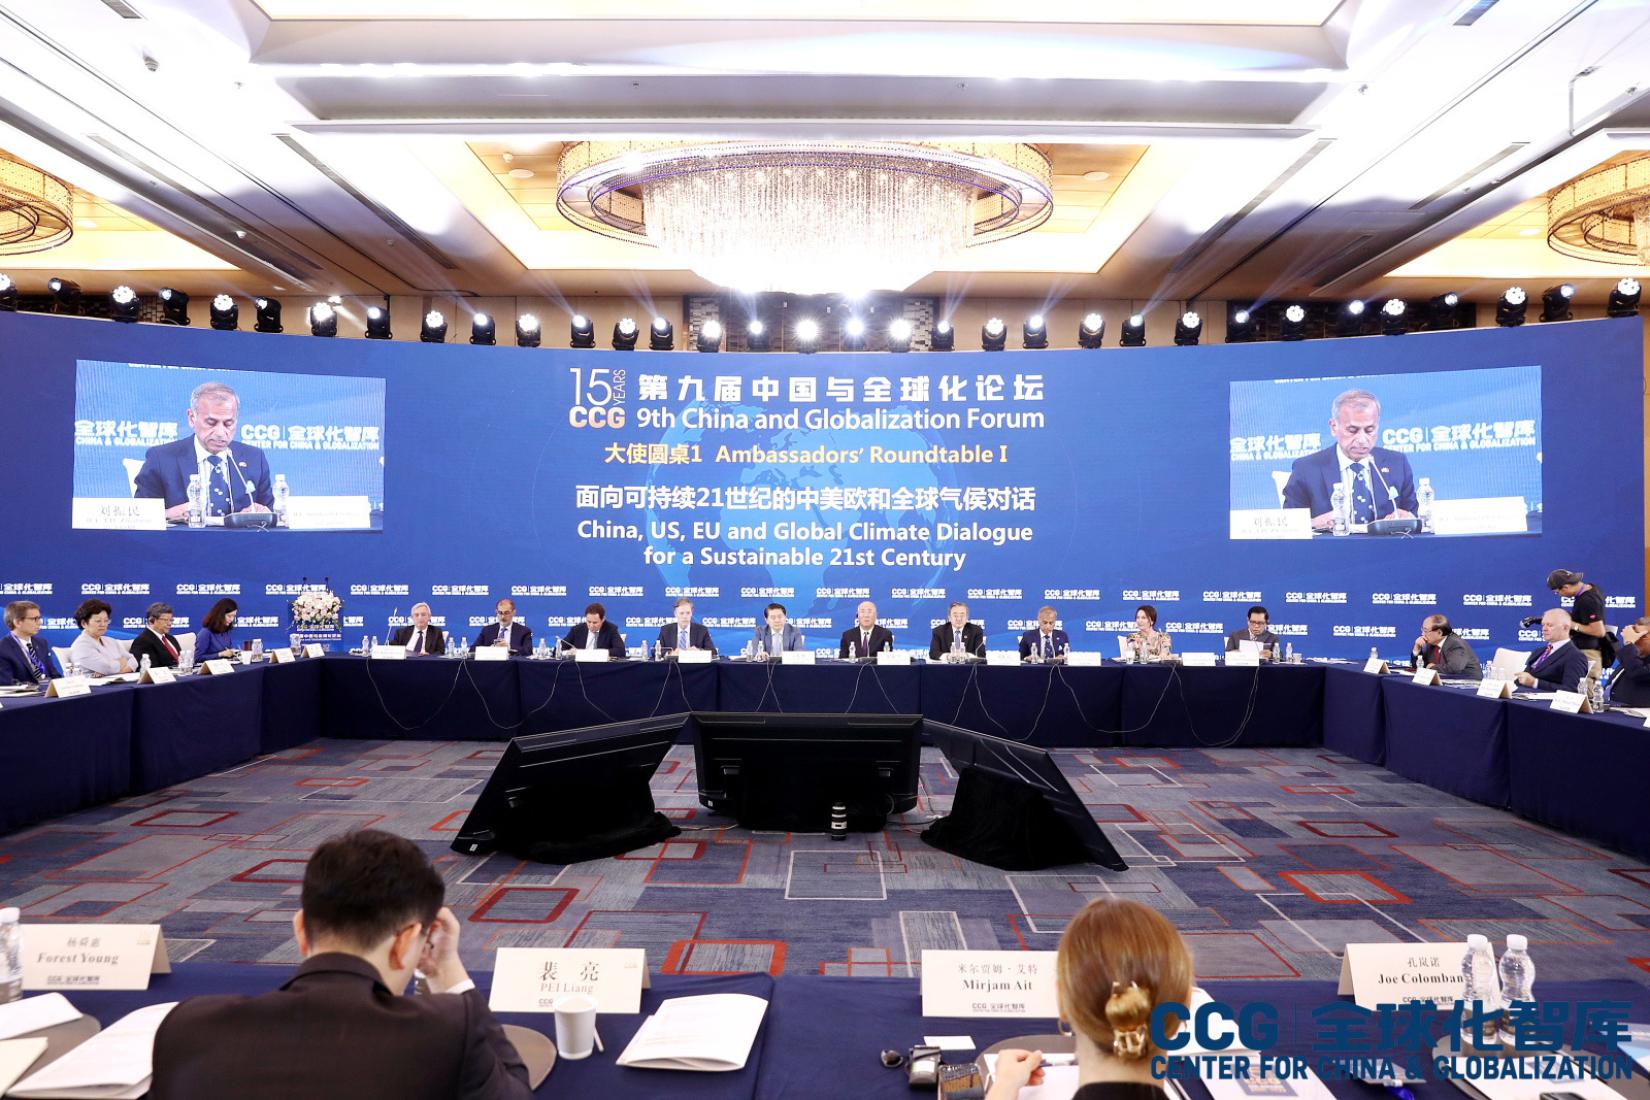 The Ambassadors' Roundtable of the 9th China and Globalization Forum